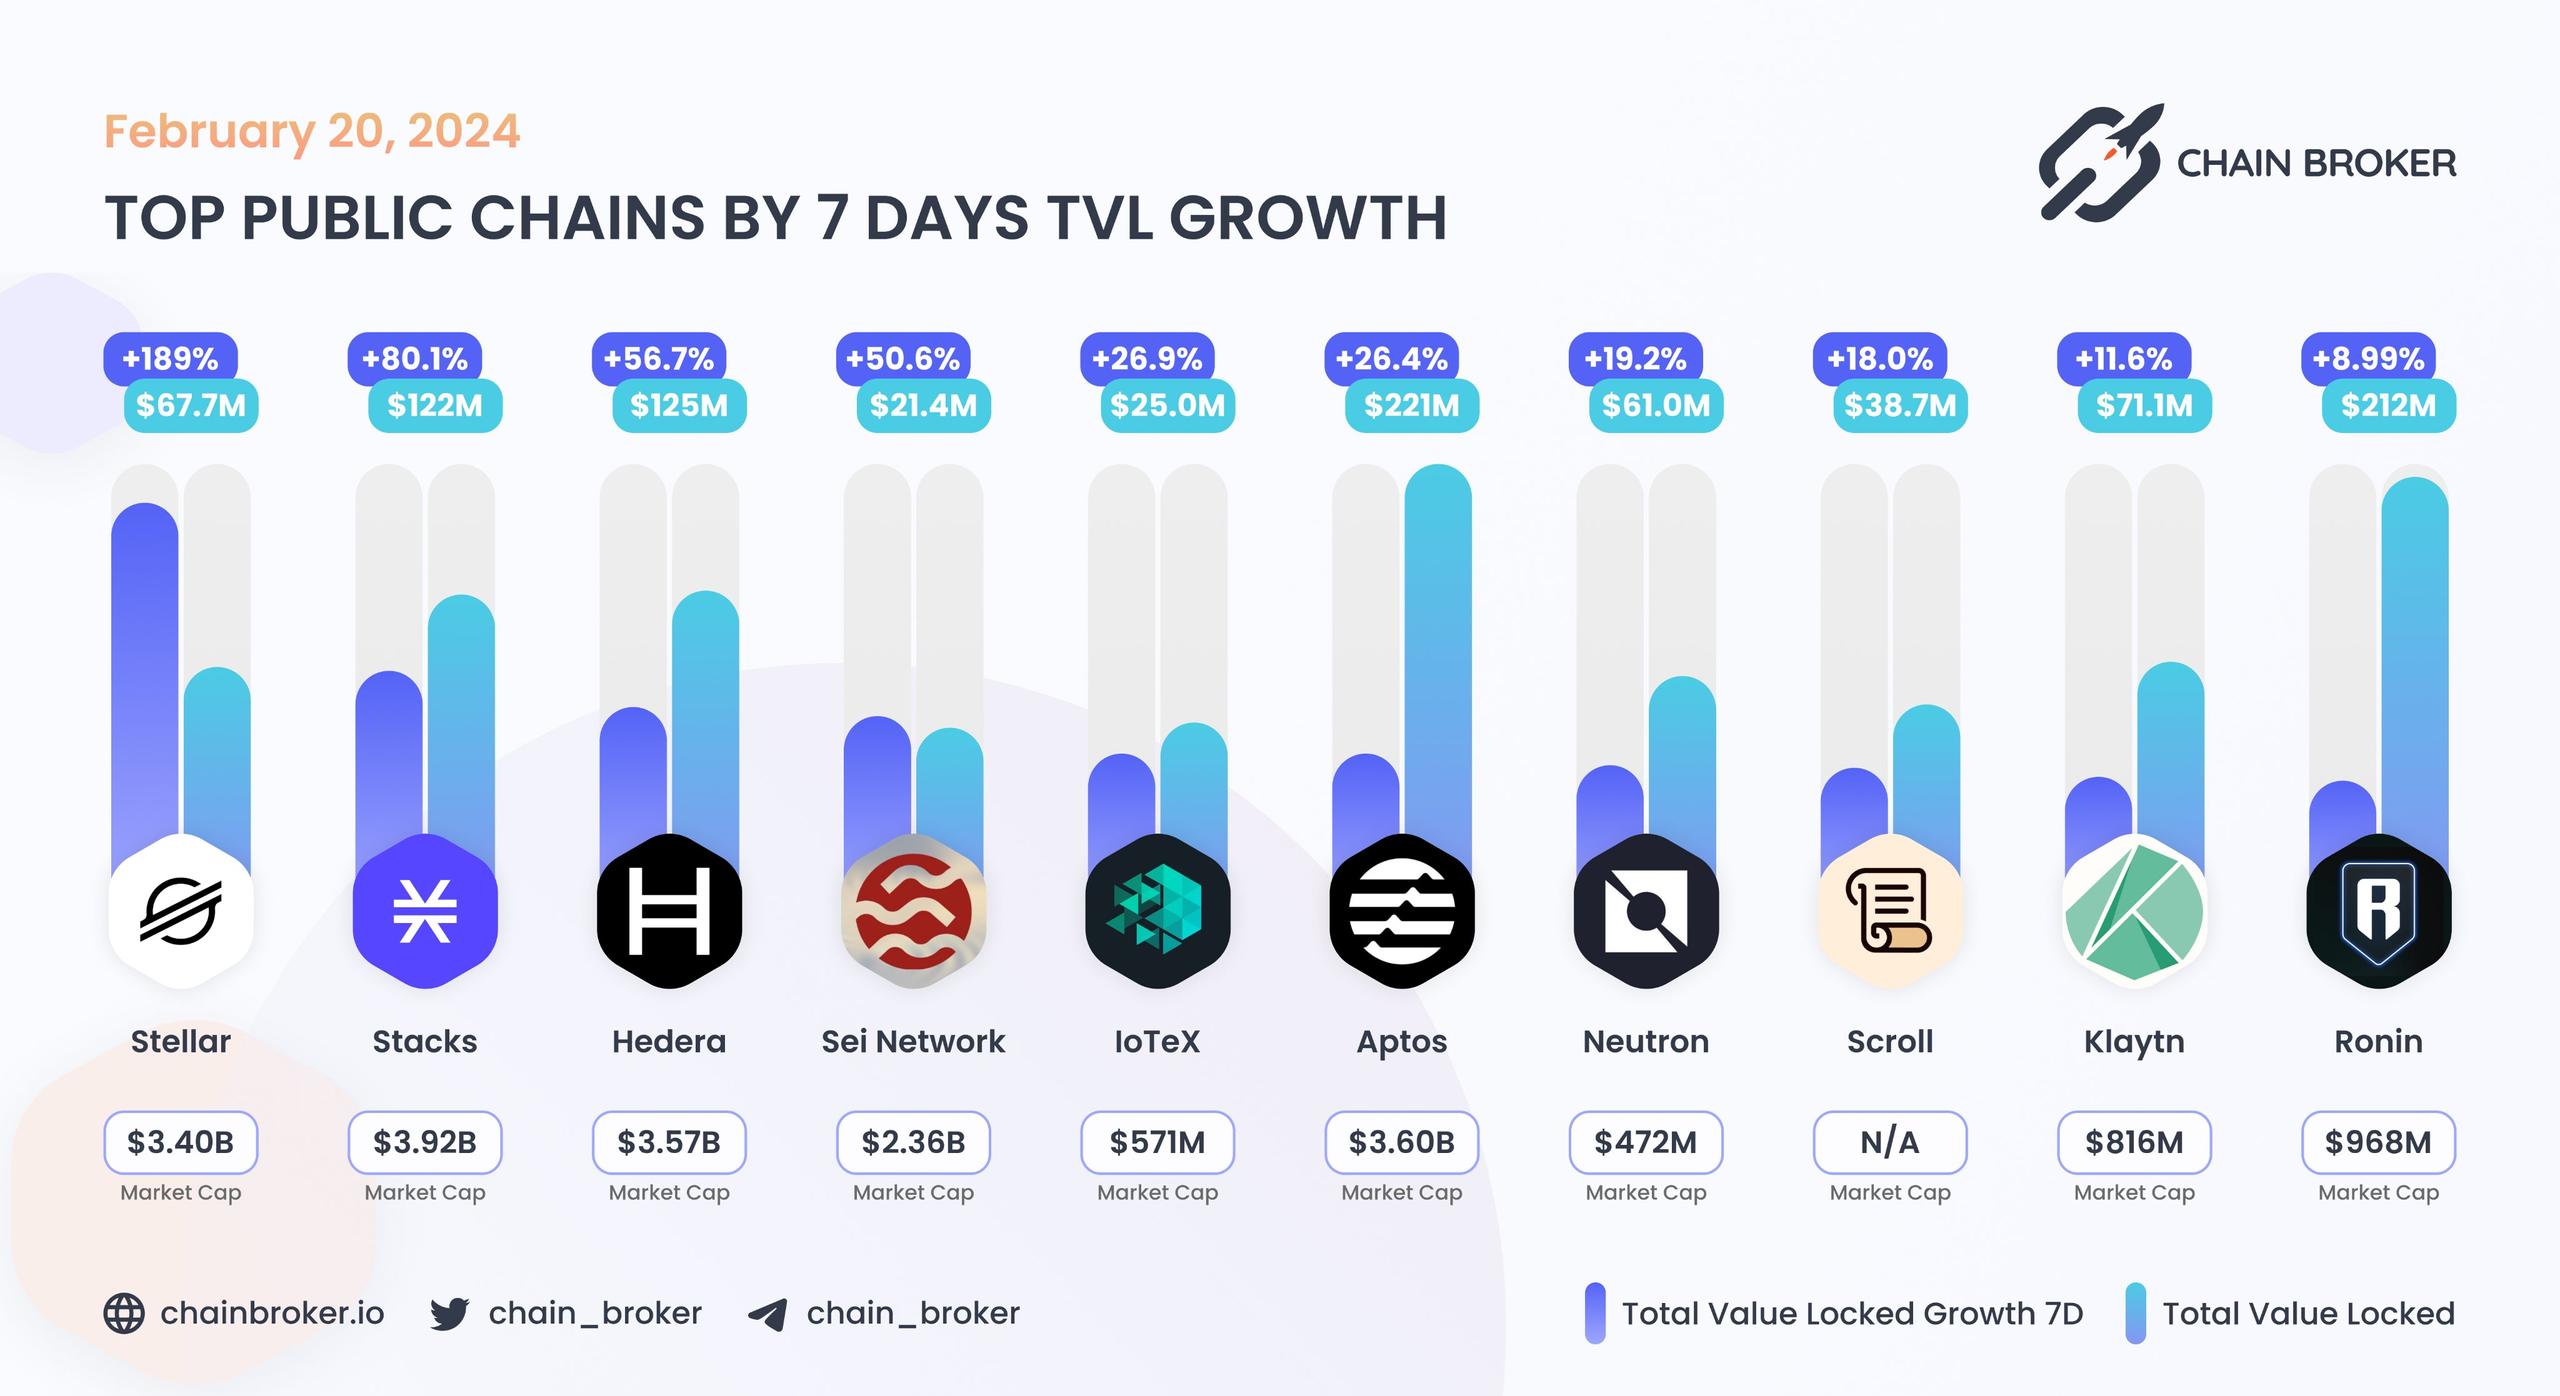 Top public chains by 7 days TVL growth